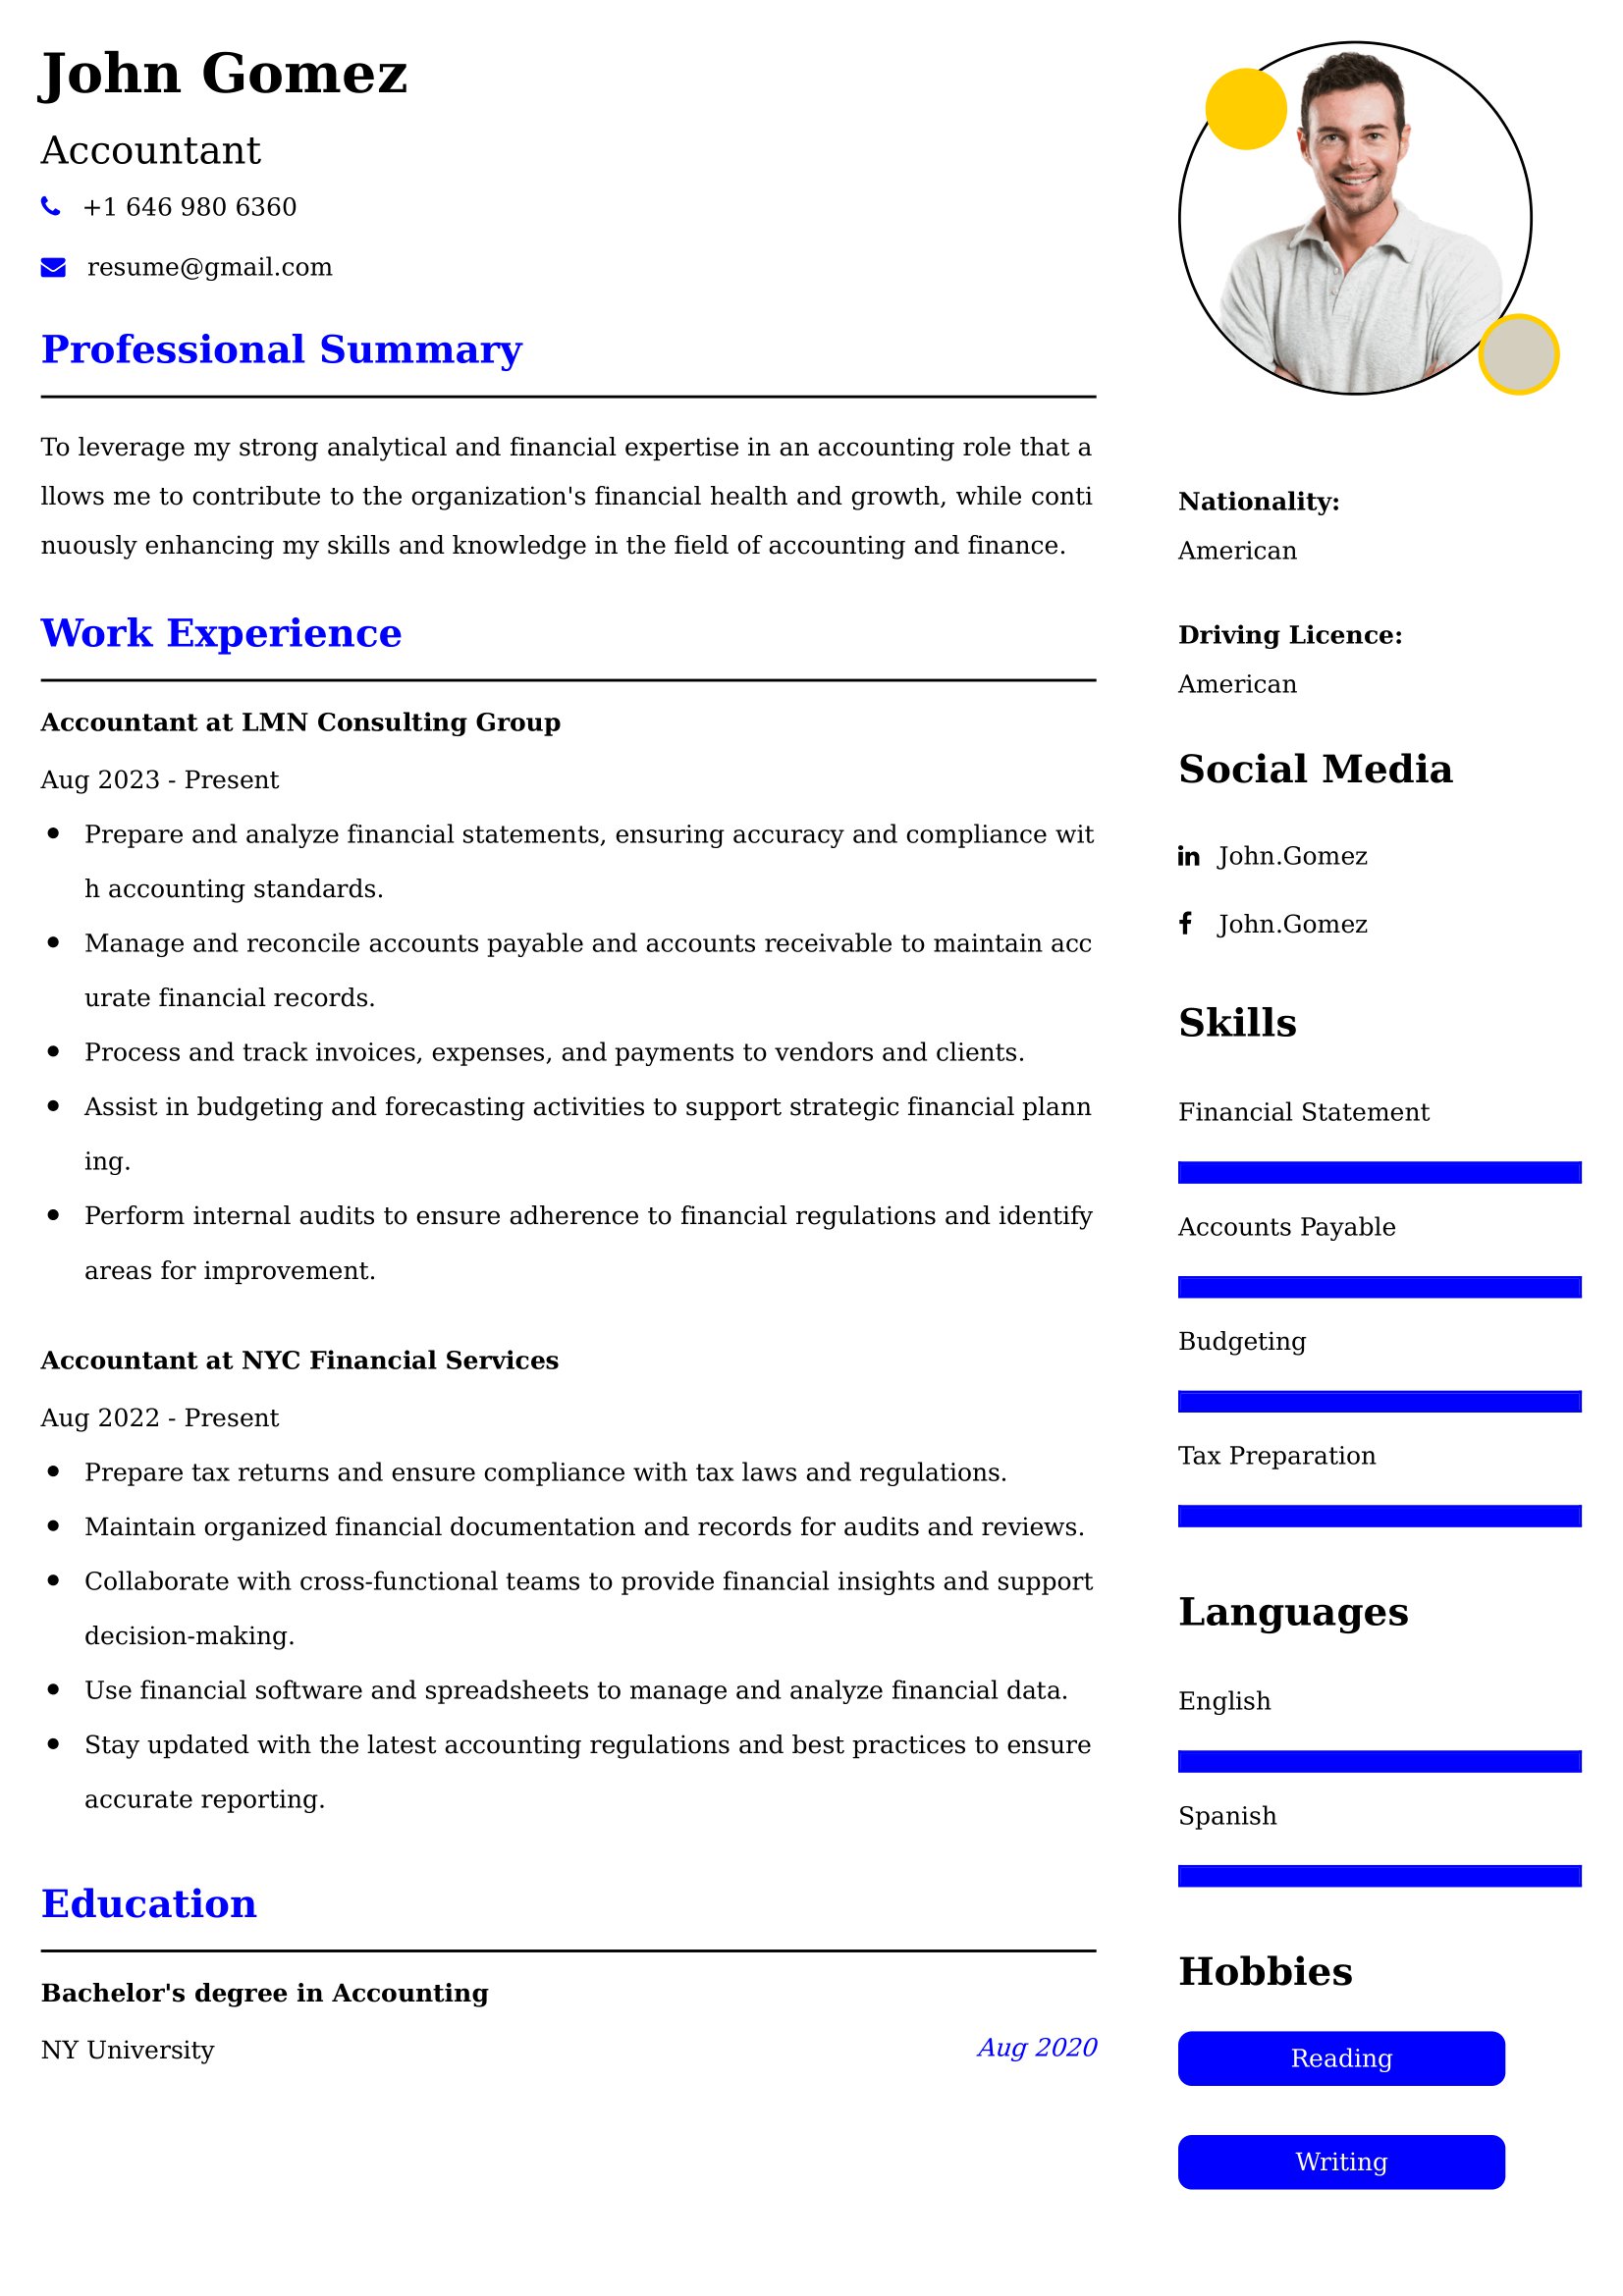 Accountant Resume Examples - UK Format, Latest Template.